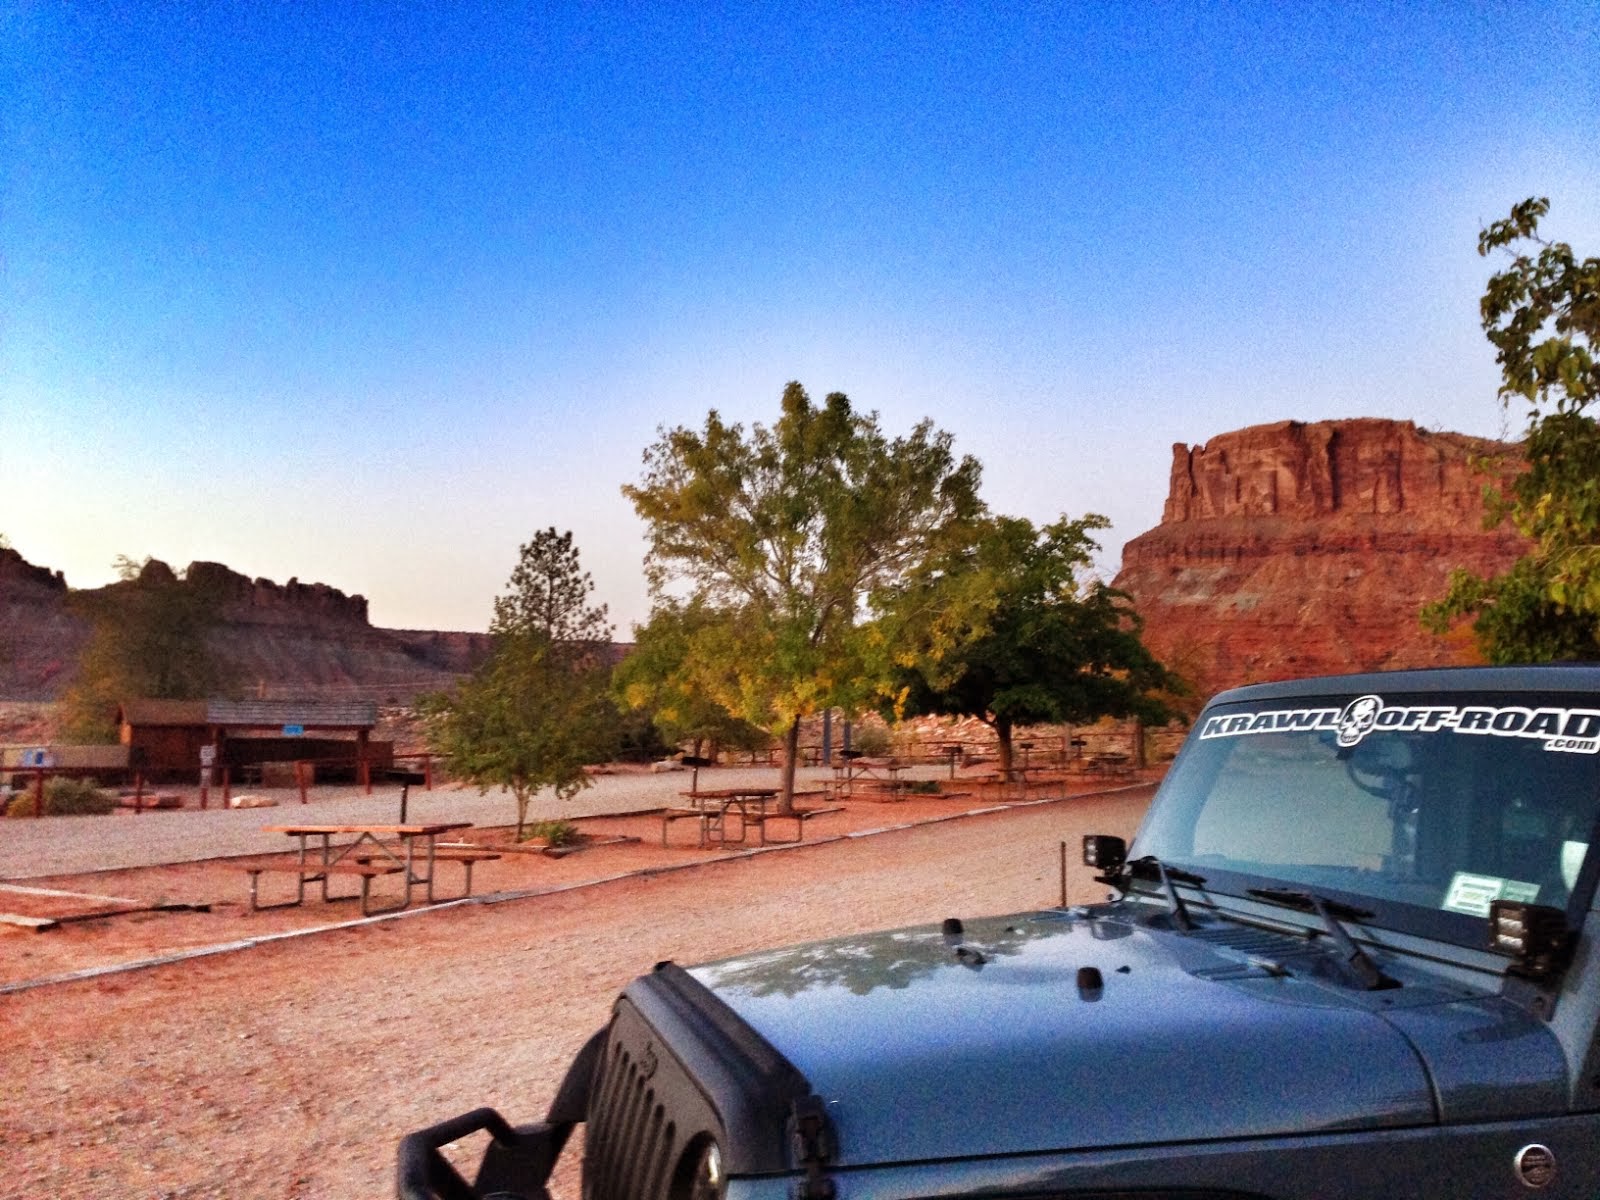 The Daily Update: Another beautiful Moab morning